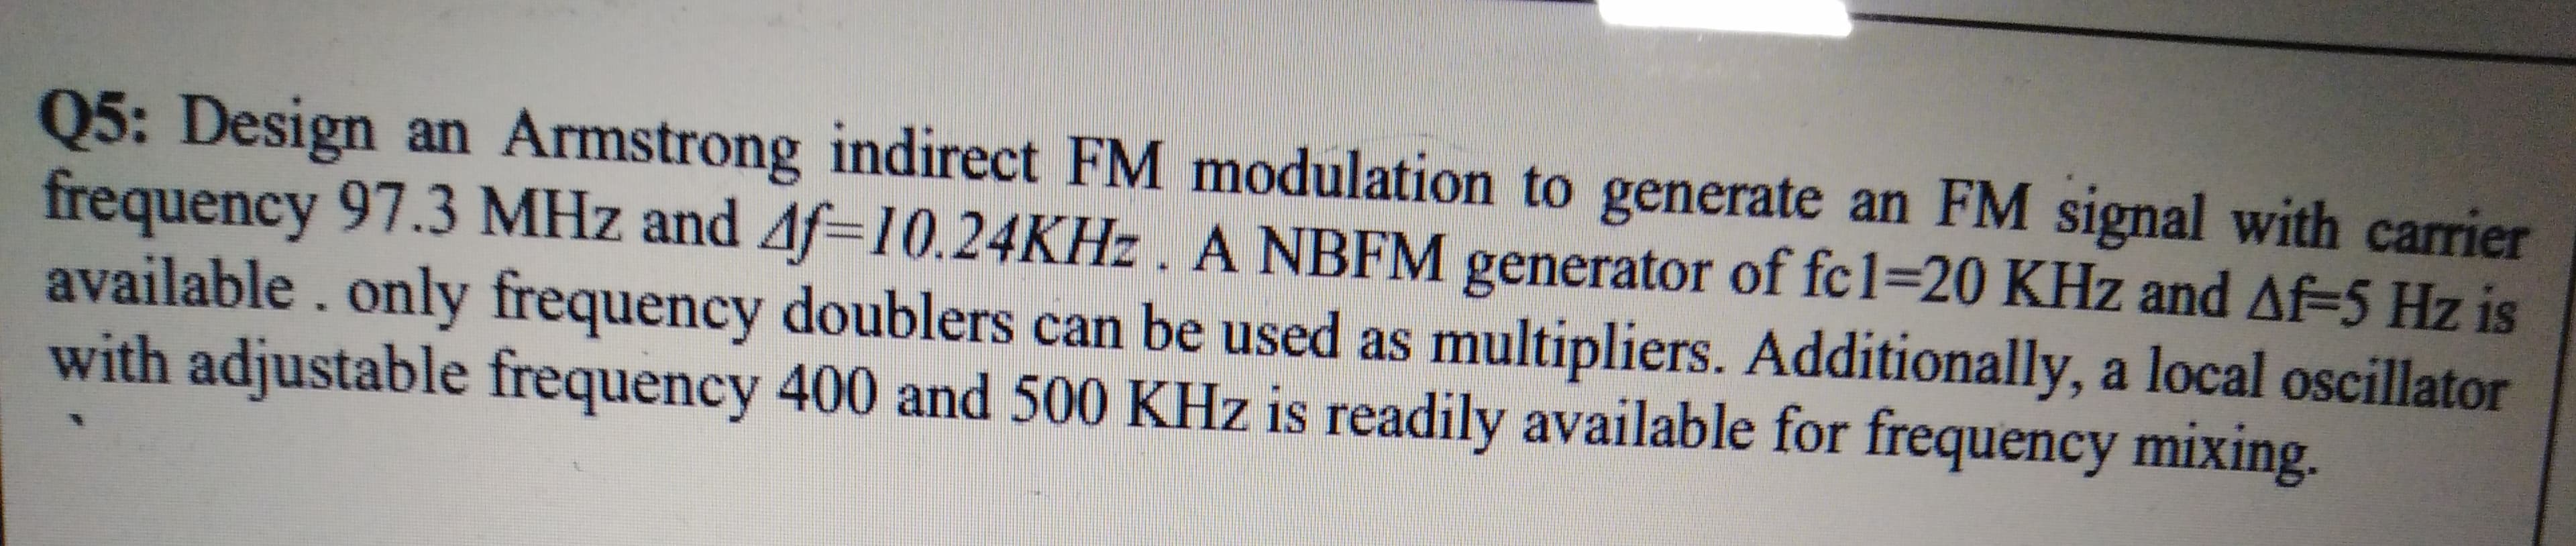 Design an Armstrong indirect FM modulation to generate an FM signal with carrier
Q5:
frequency 97.3 MHz and Af=10.24KHZ. A NBFM generator of fc1=20 KHz and Af-5 Hz is
available. only frequency doublers can be used as multipliers. Additionally, a local oscillator
with adjustable frequency 400 and 500 KHz is readily available for frequency mixing.
